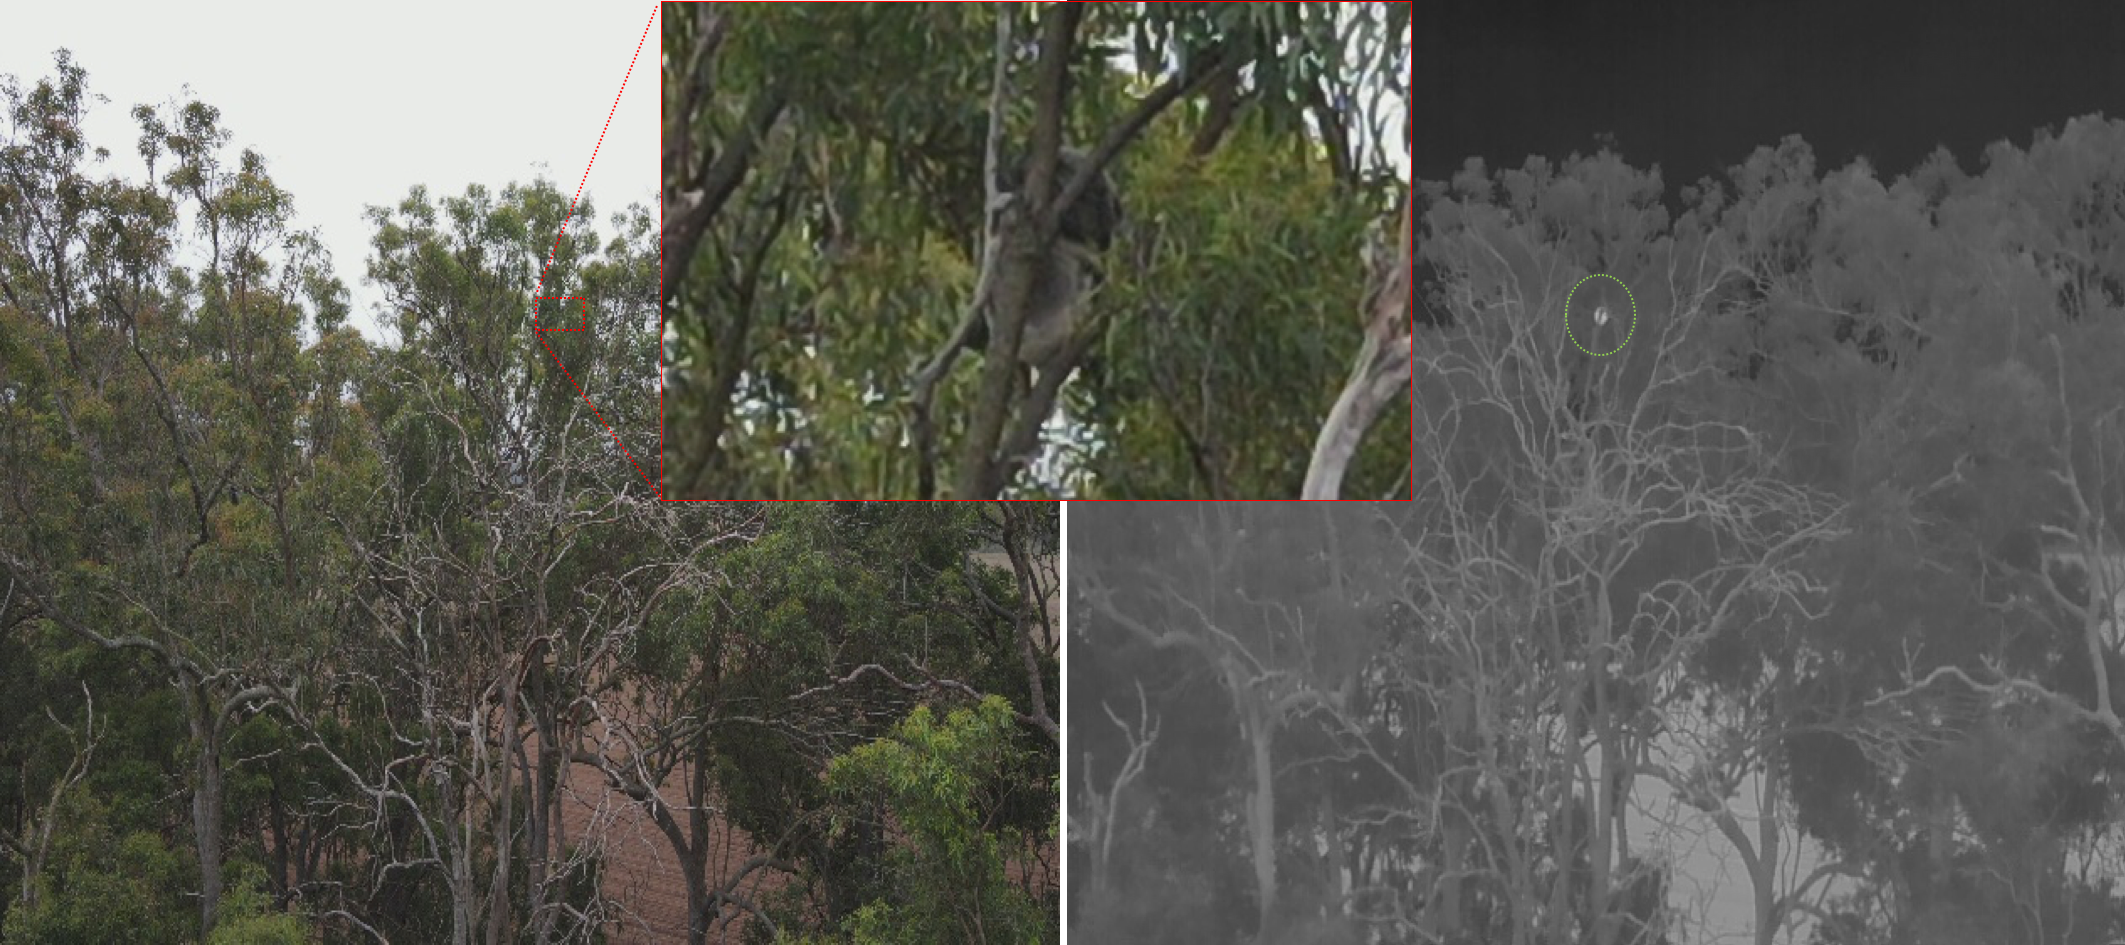 Twin photos of the same tree canopy, the first a normal photo in which a koala is there but very difficult to see, the second a thermal image where the koala is clearly identifiable.